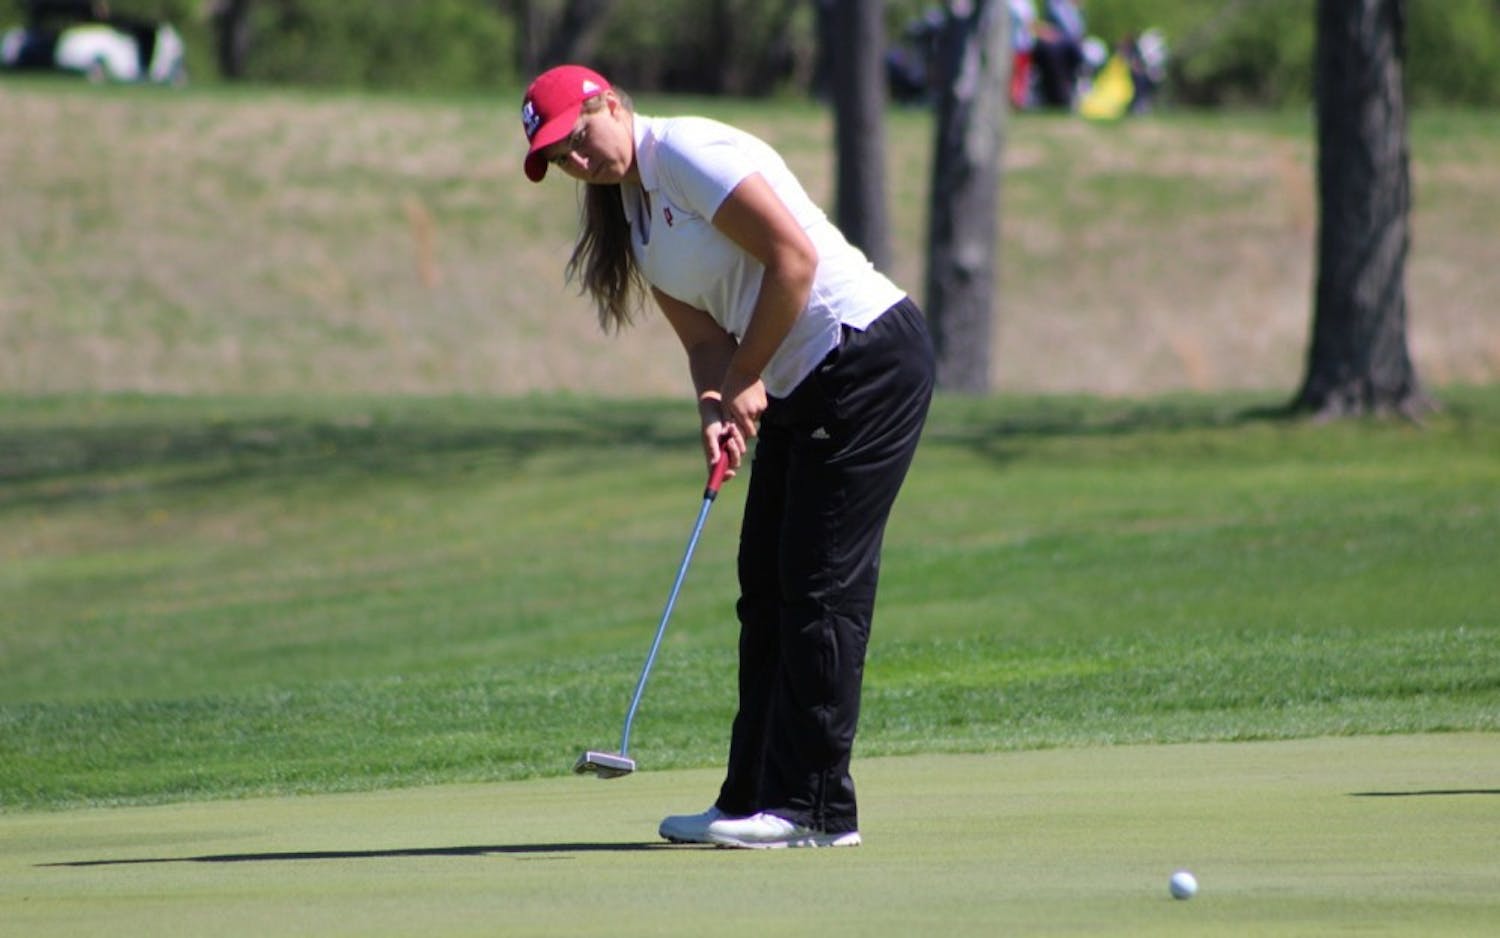 Sophomore Erin Harper putts during the first round of the IU Invitational at IU Golf Course. Harper finished tied for 25th at the Big Ten Championships in Cincinnati, Ohio.&nbsp;